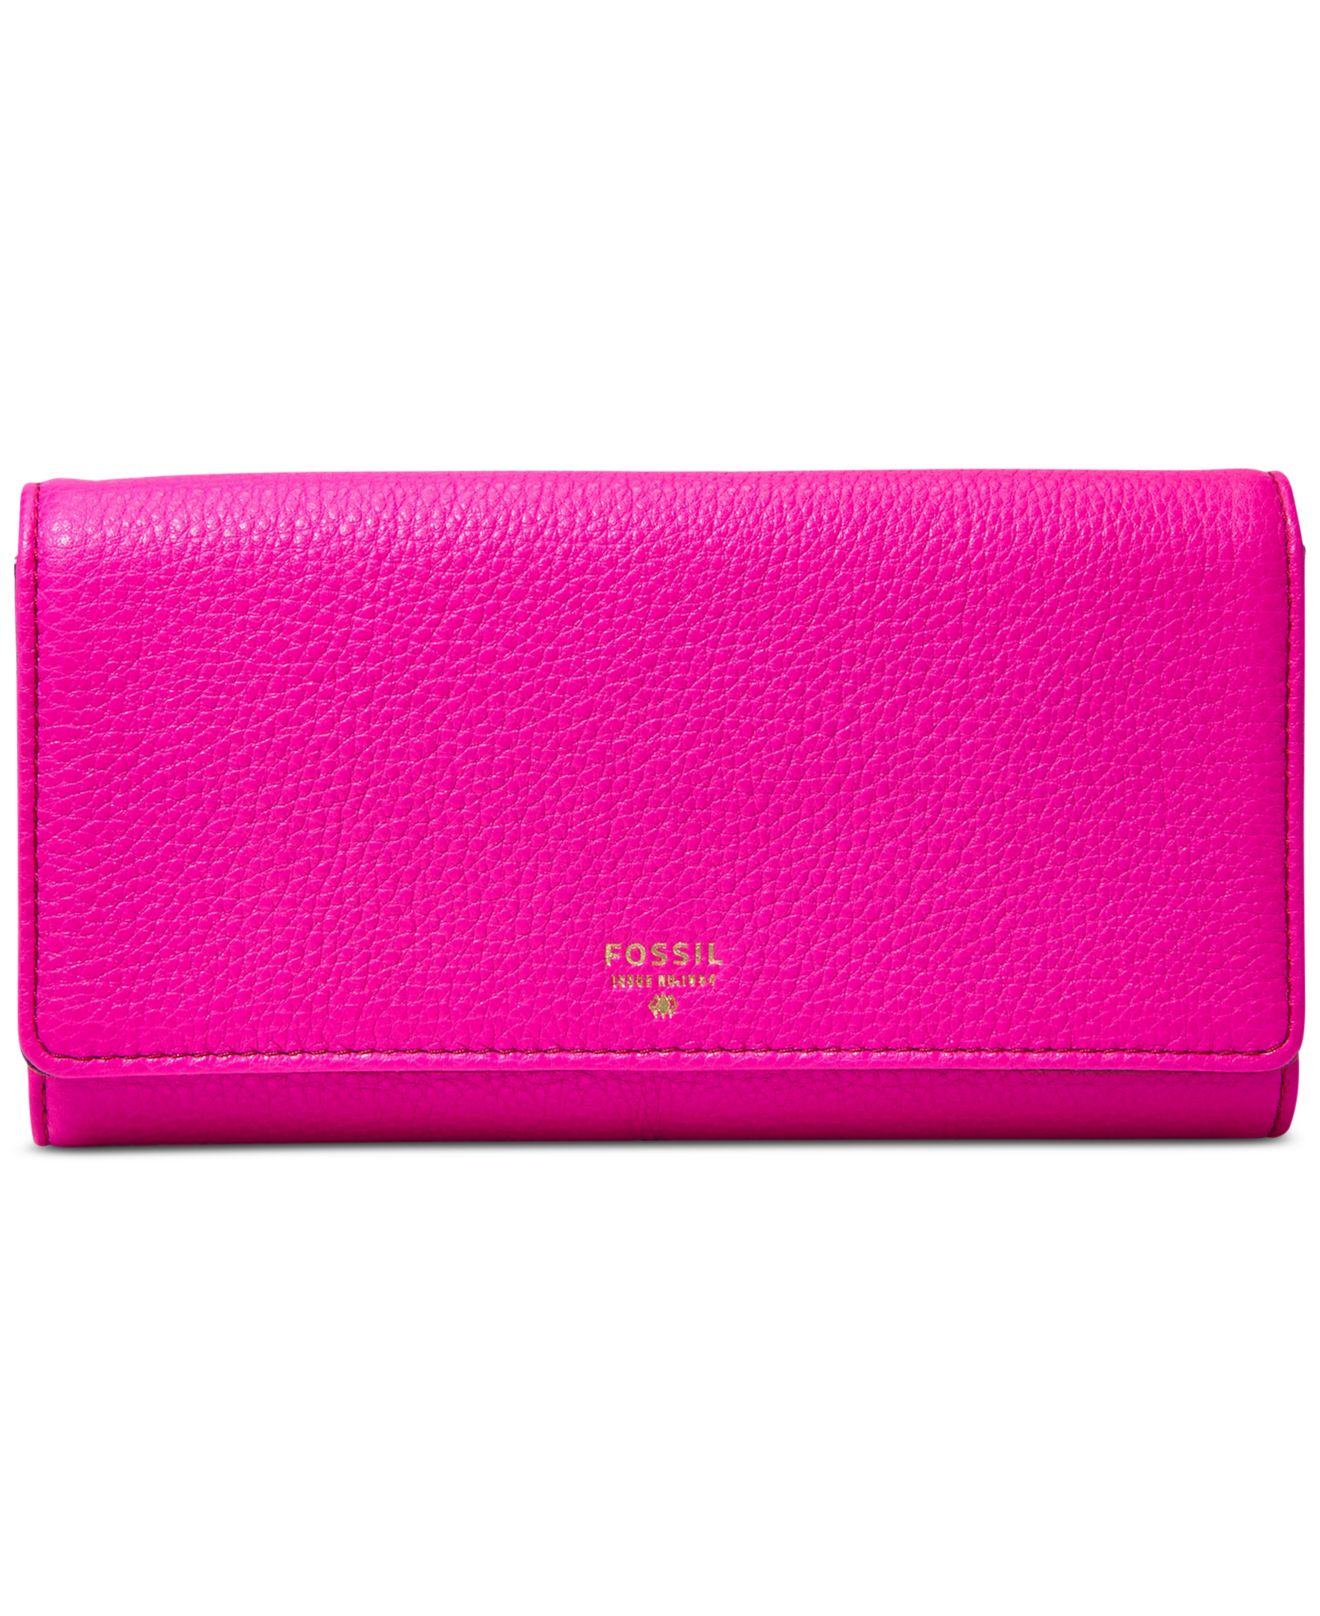 Lyst - Fossil Sydney Leather Flap Clutch Wallet in Pink